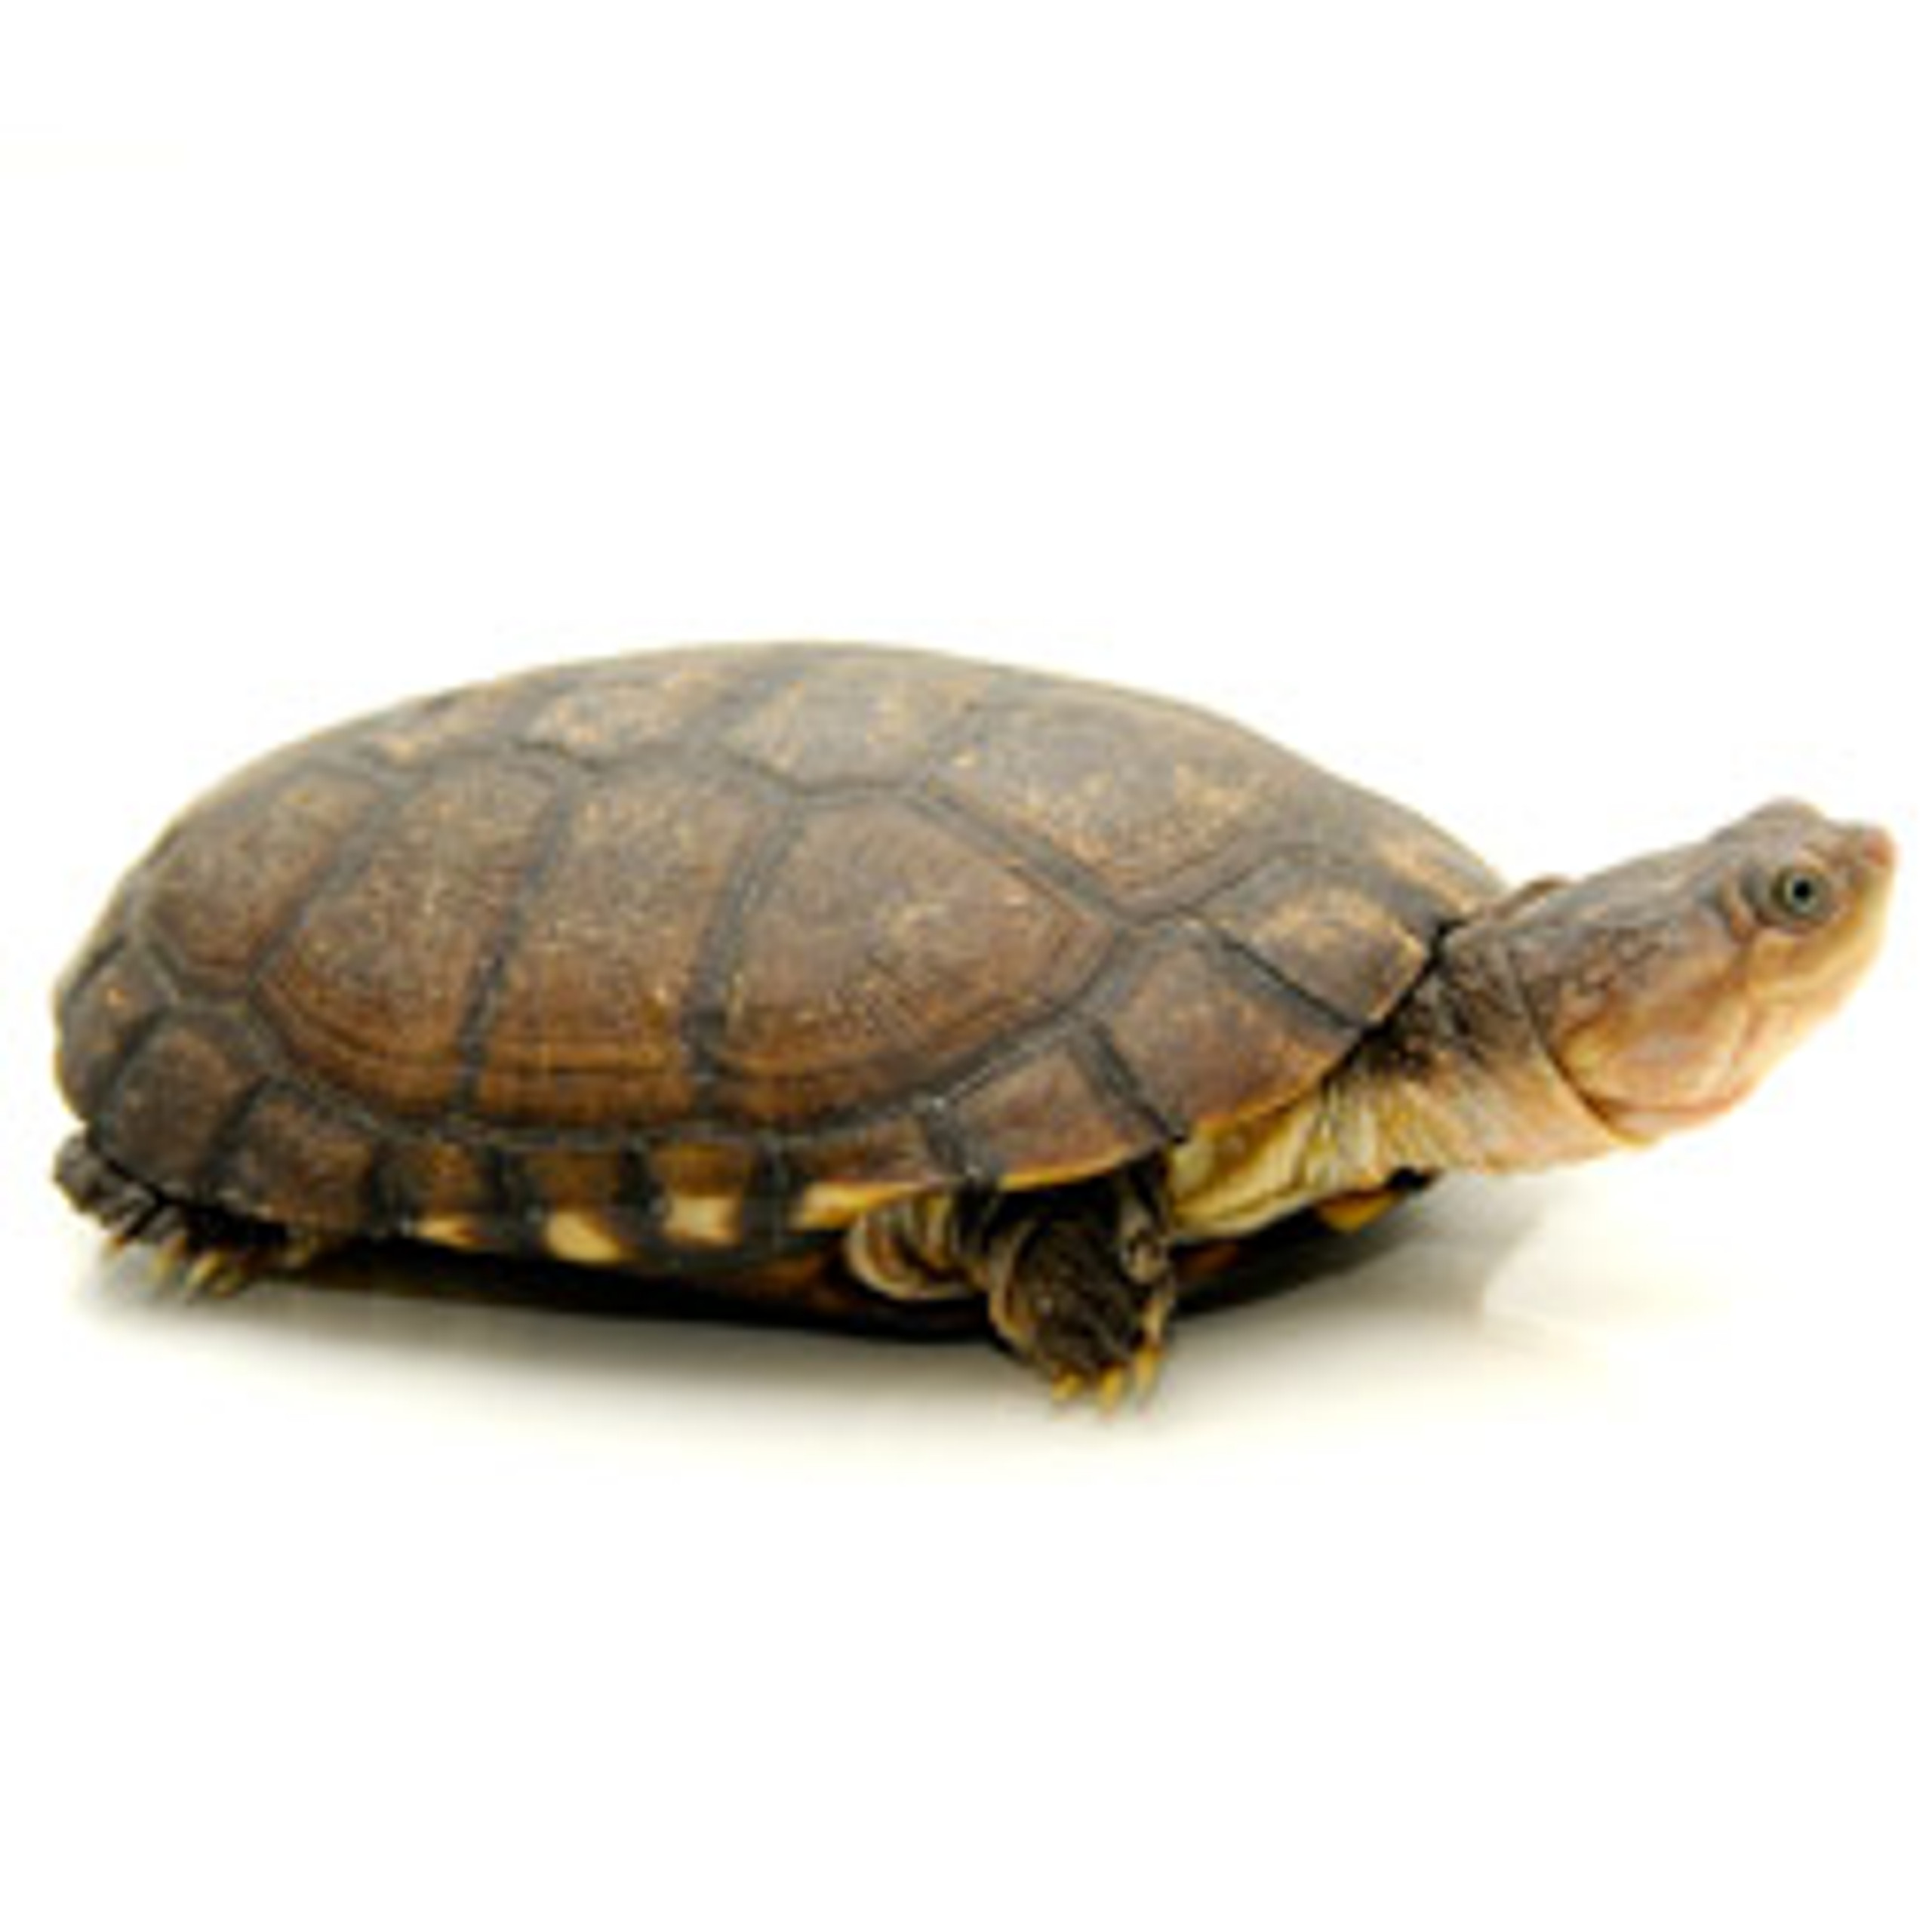 African Side-Neck Turtle from ReptMart.com